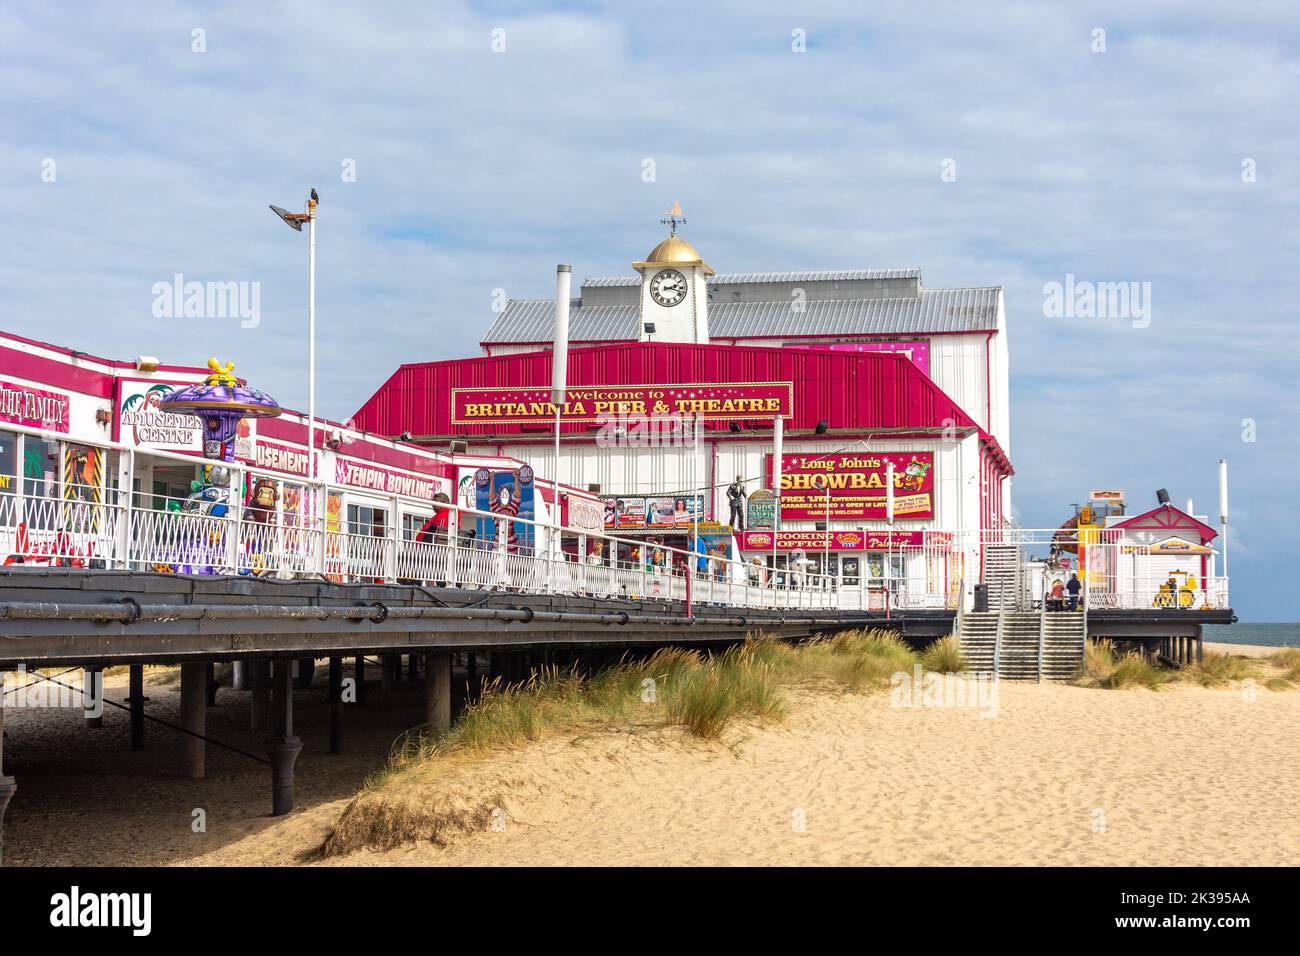 Brittania Pier & Theatre, Marine Parade, Great Yarmouth, Norfolk, Angleterre, Royaume-Uni Banque D'Images